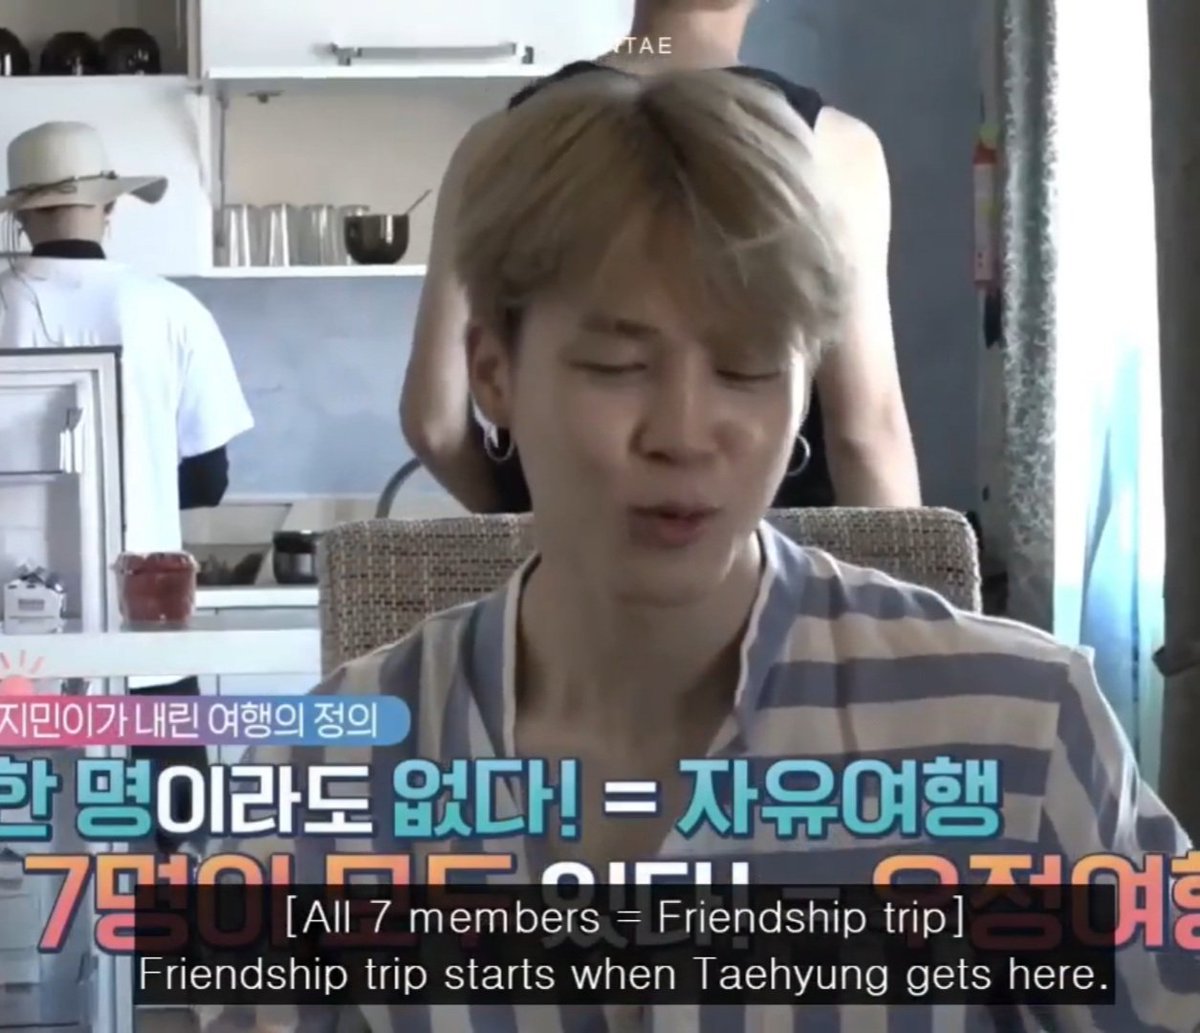  #JIMIN missing Taehyung so much he always said his name and talked about him 